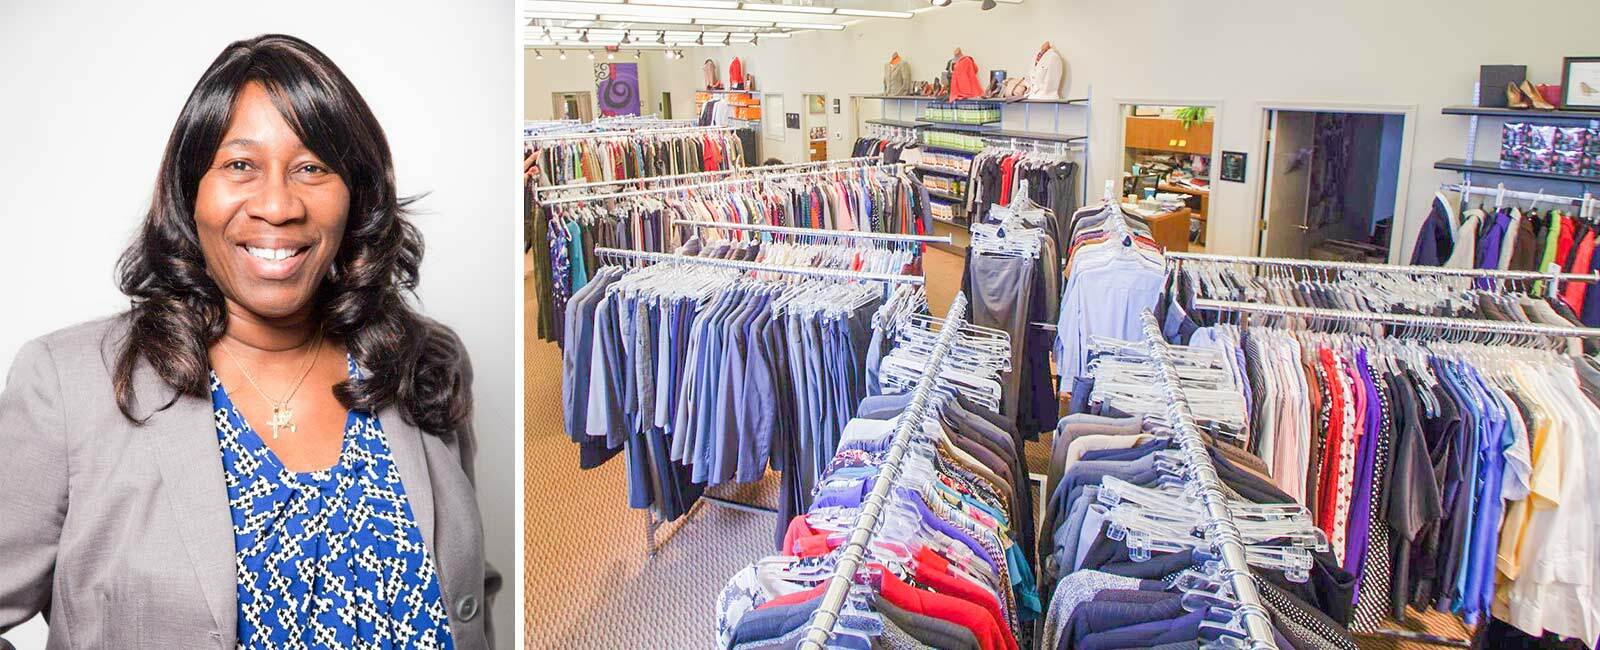 photos of businesswoman and store interior featuring clothes on racks